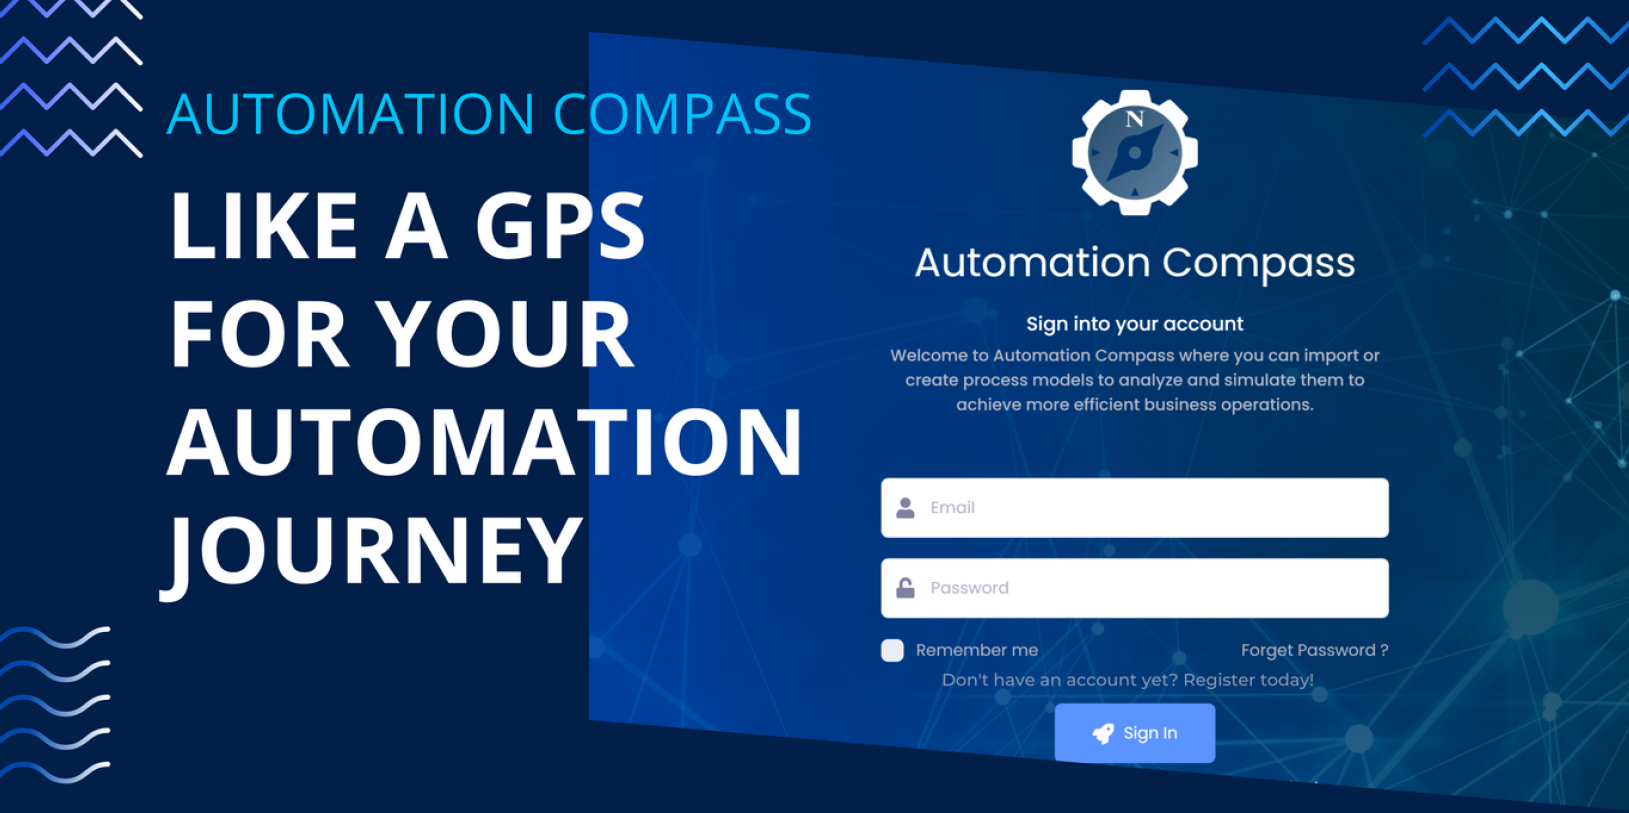 Automation Compass login screen - Like a GPS for Your Automation Journey